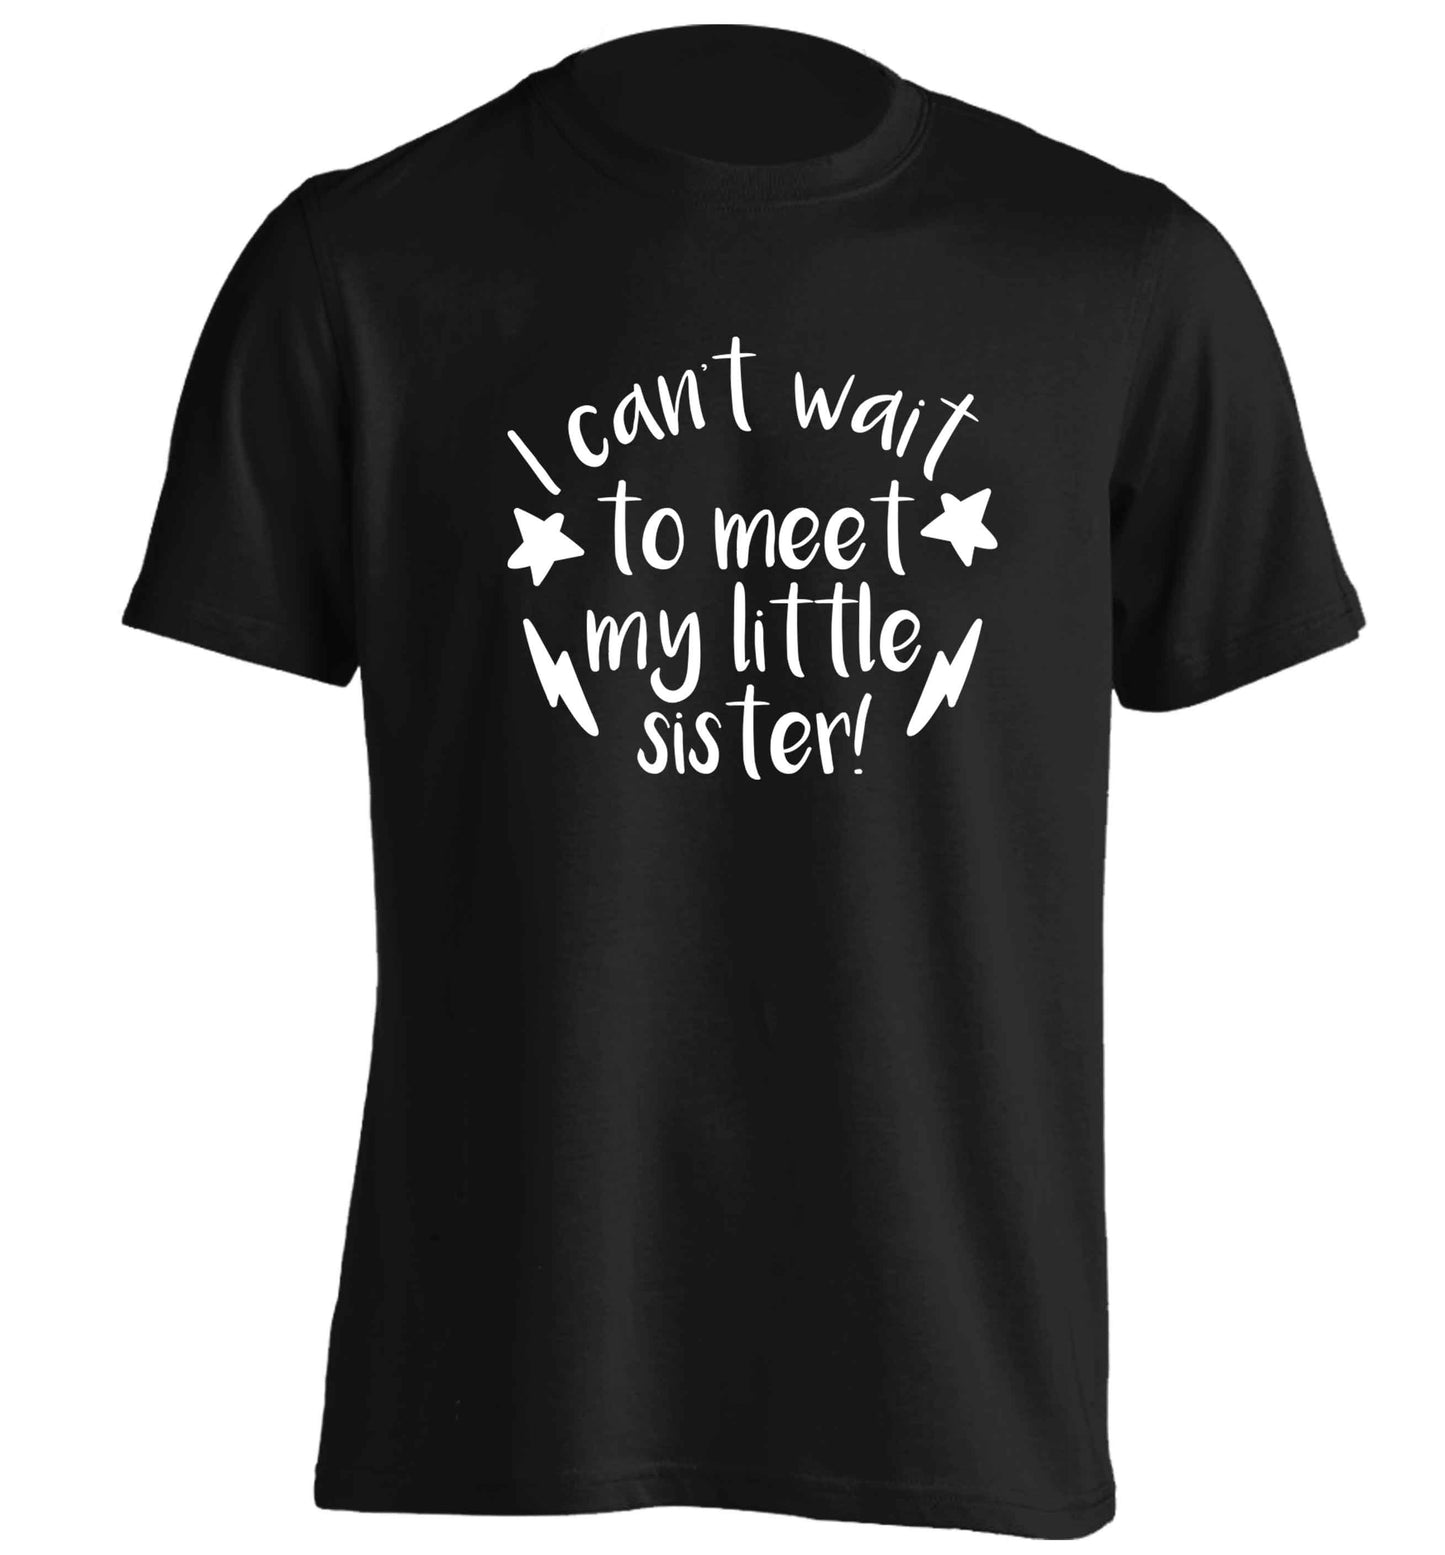 Something special growing inside it's my little sister I can't wait to say hi! adults unisex black Tshirt 2XL